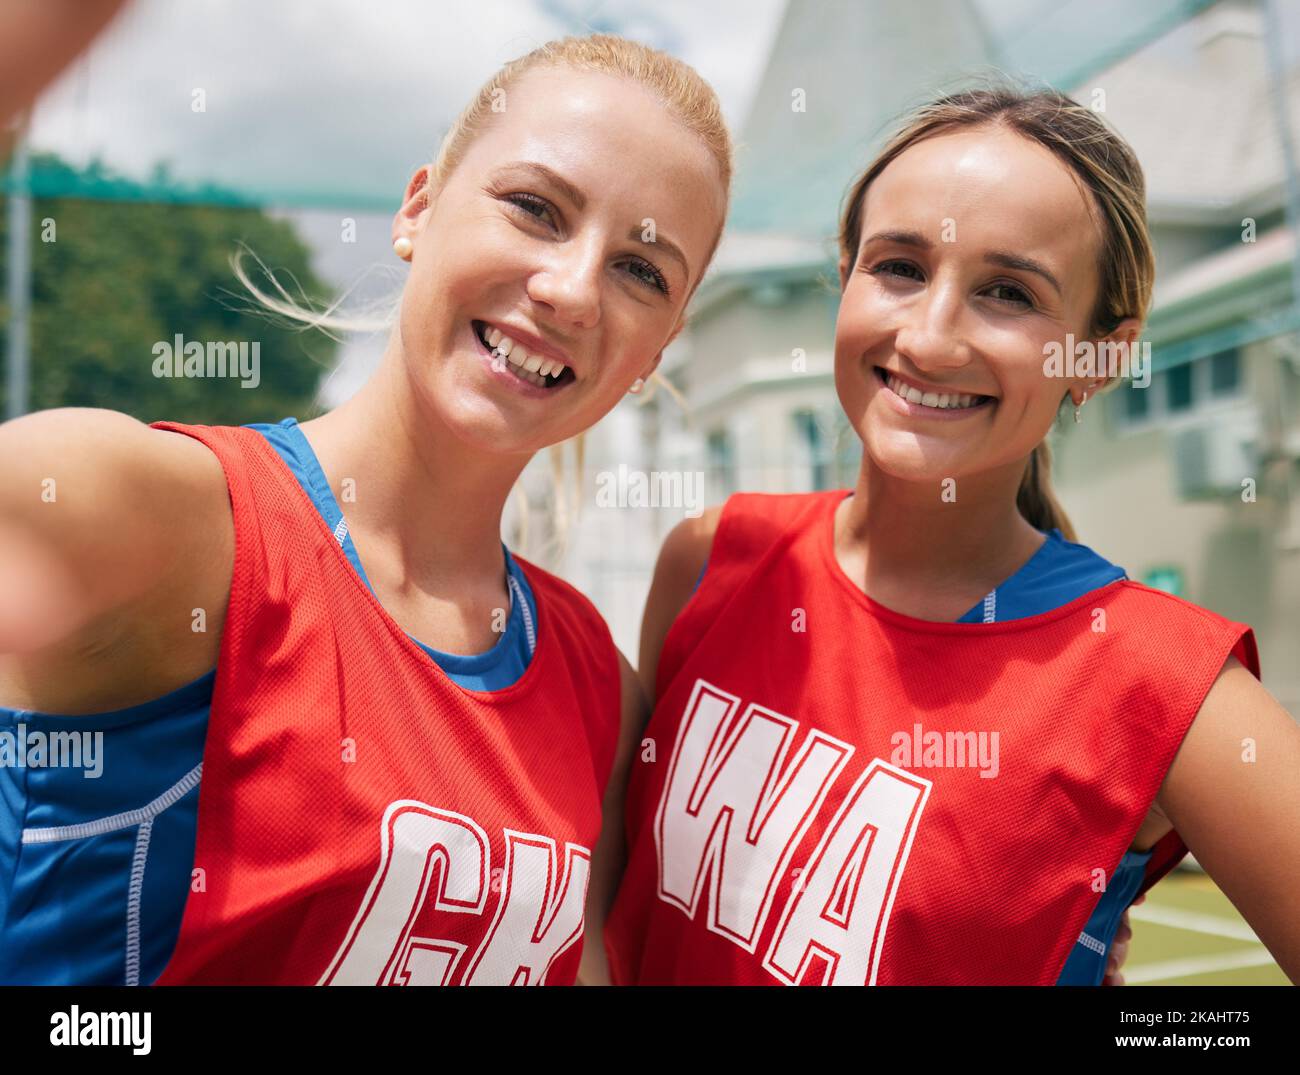 Selfie, sports and women team smile after a competition or game on netball court, field or outdoor park in Australia with cellphone for social media Stock Photo